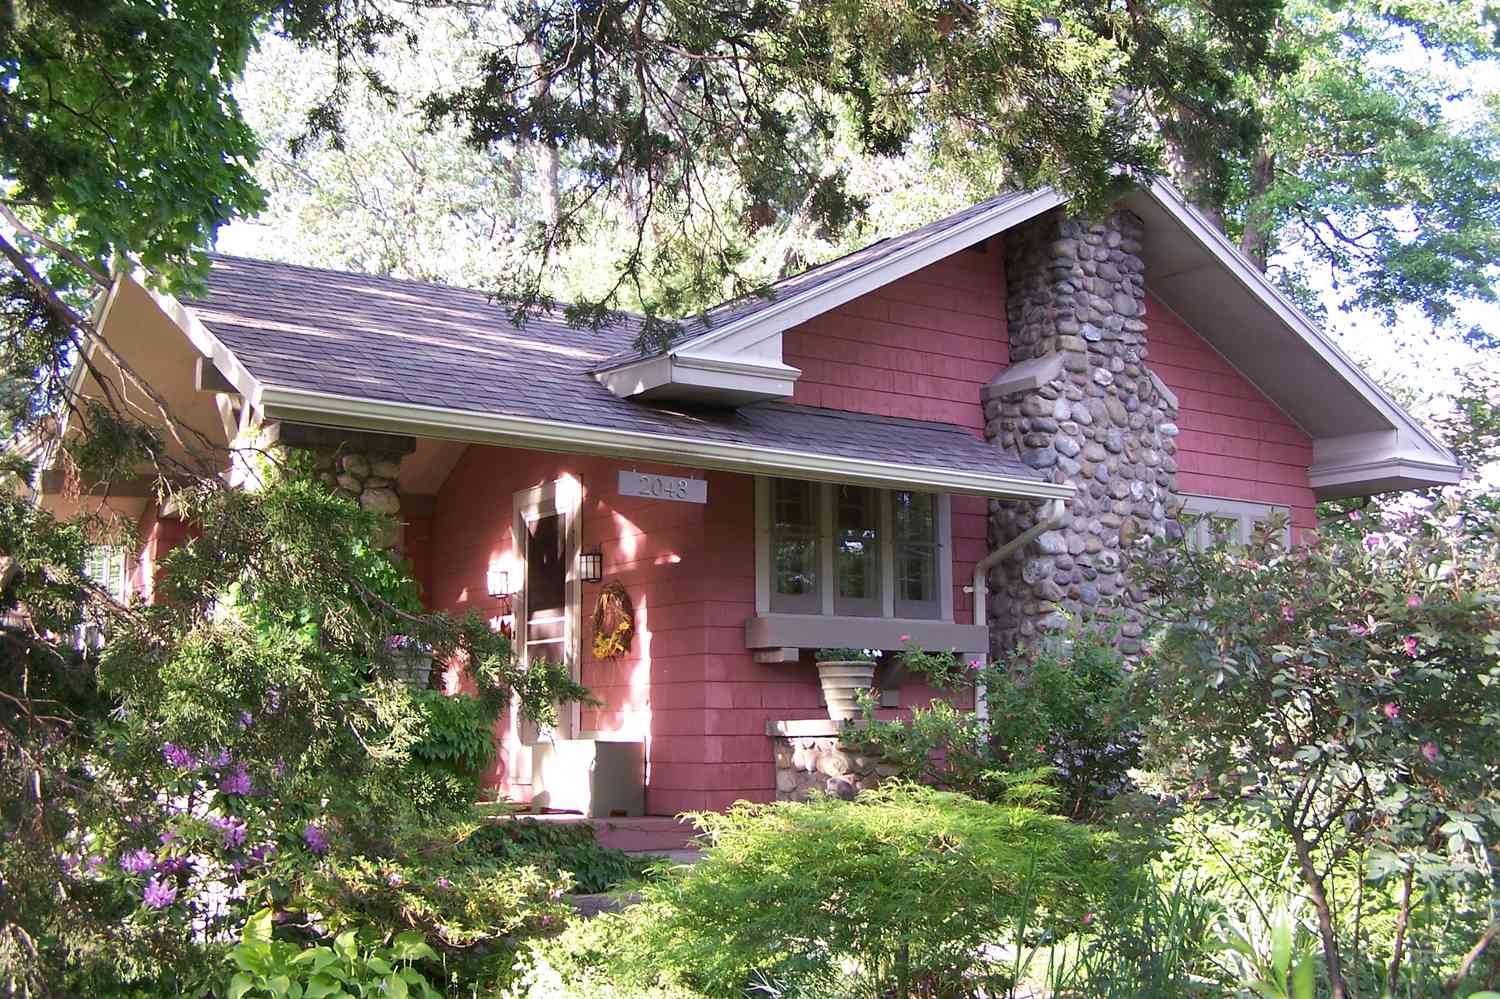 A Large Stone Chimney Is the Dominant Feature on This Rose-Colored Bungalow